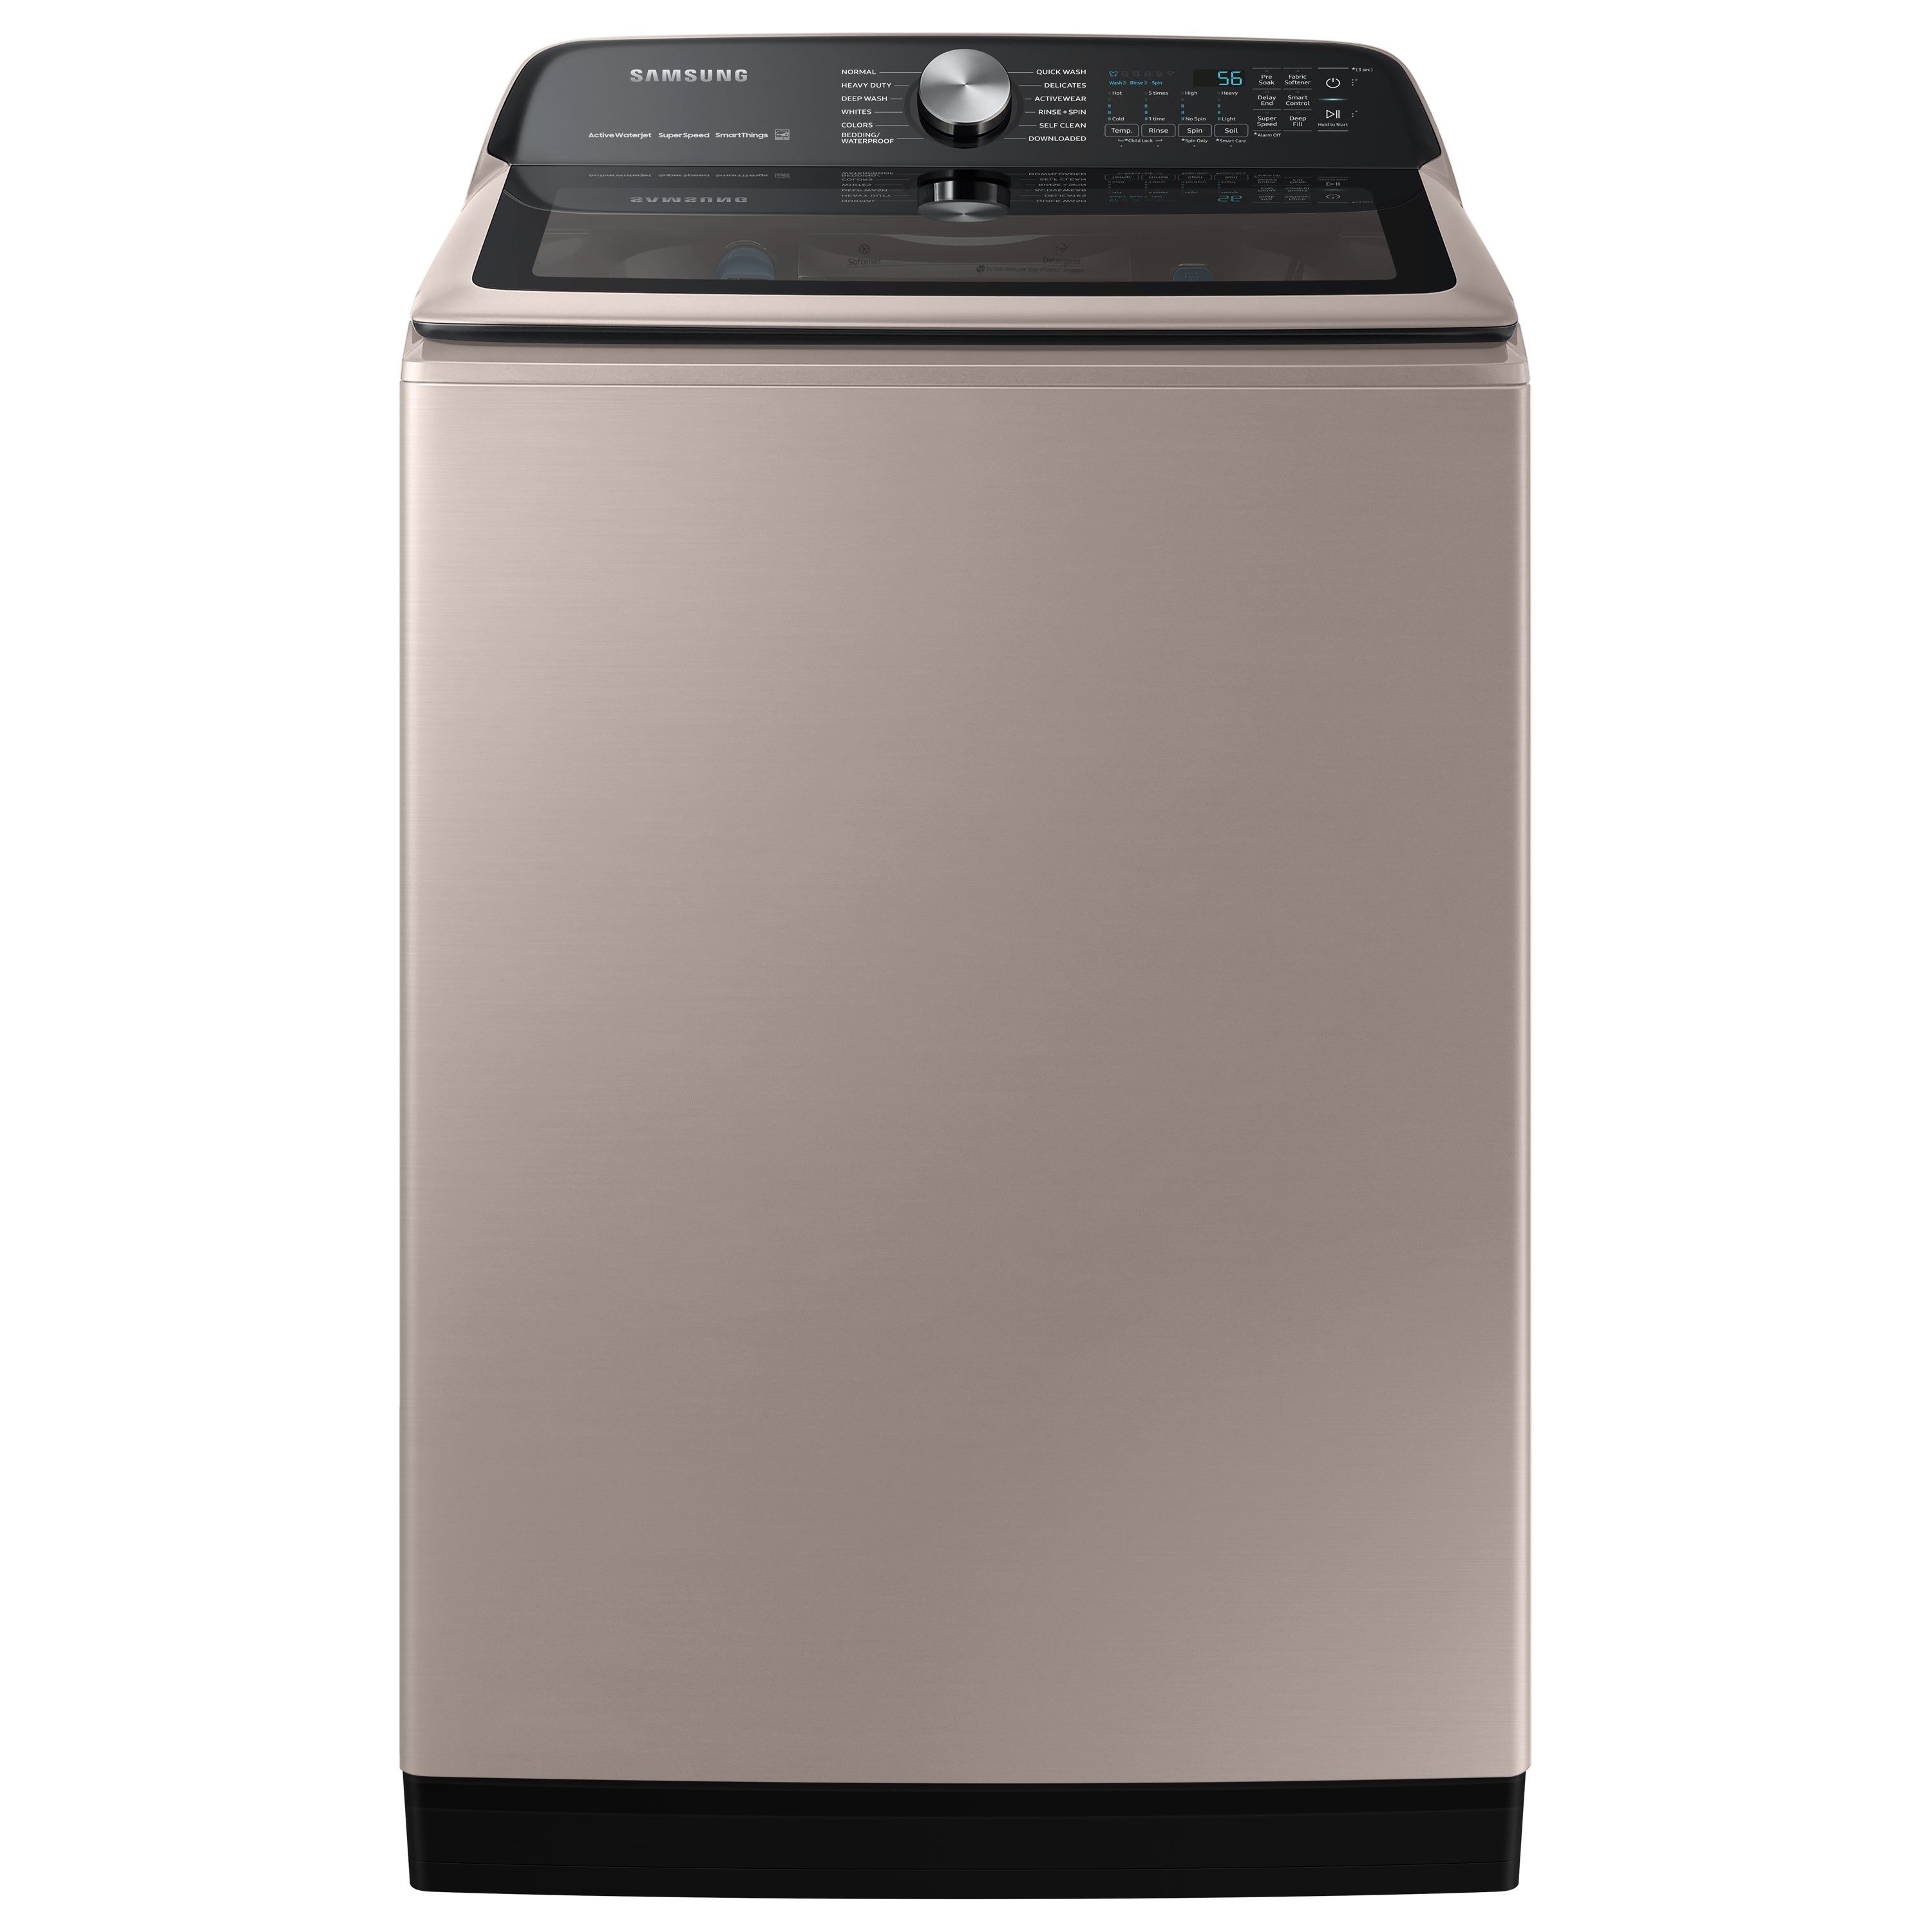 Samsung 5.2-cu ft High Efficiency Top-Load Washer